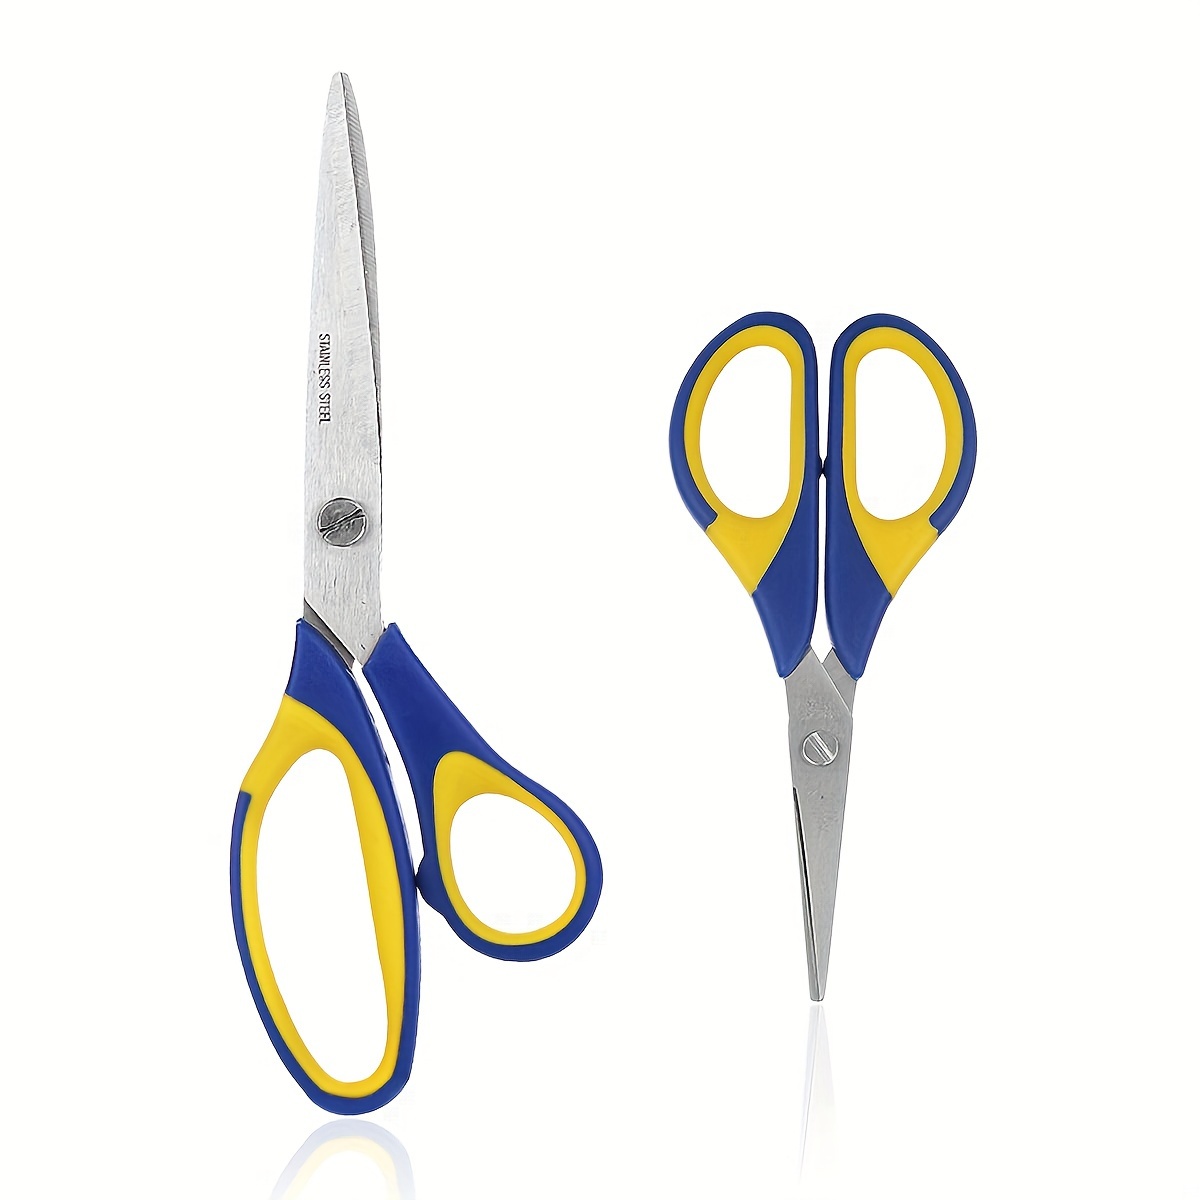 3/1PC Craft Scissors Stainless Steel Scissors with Protective Cover  Straight Tip Sewing Scissors for Crafting